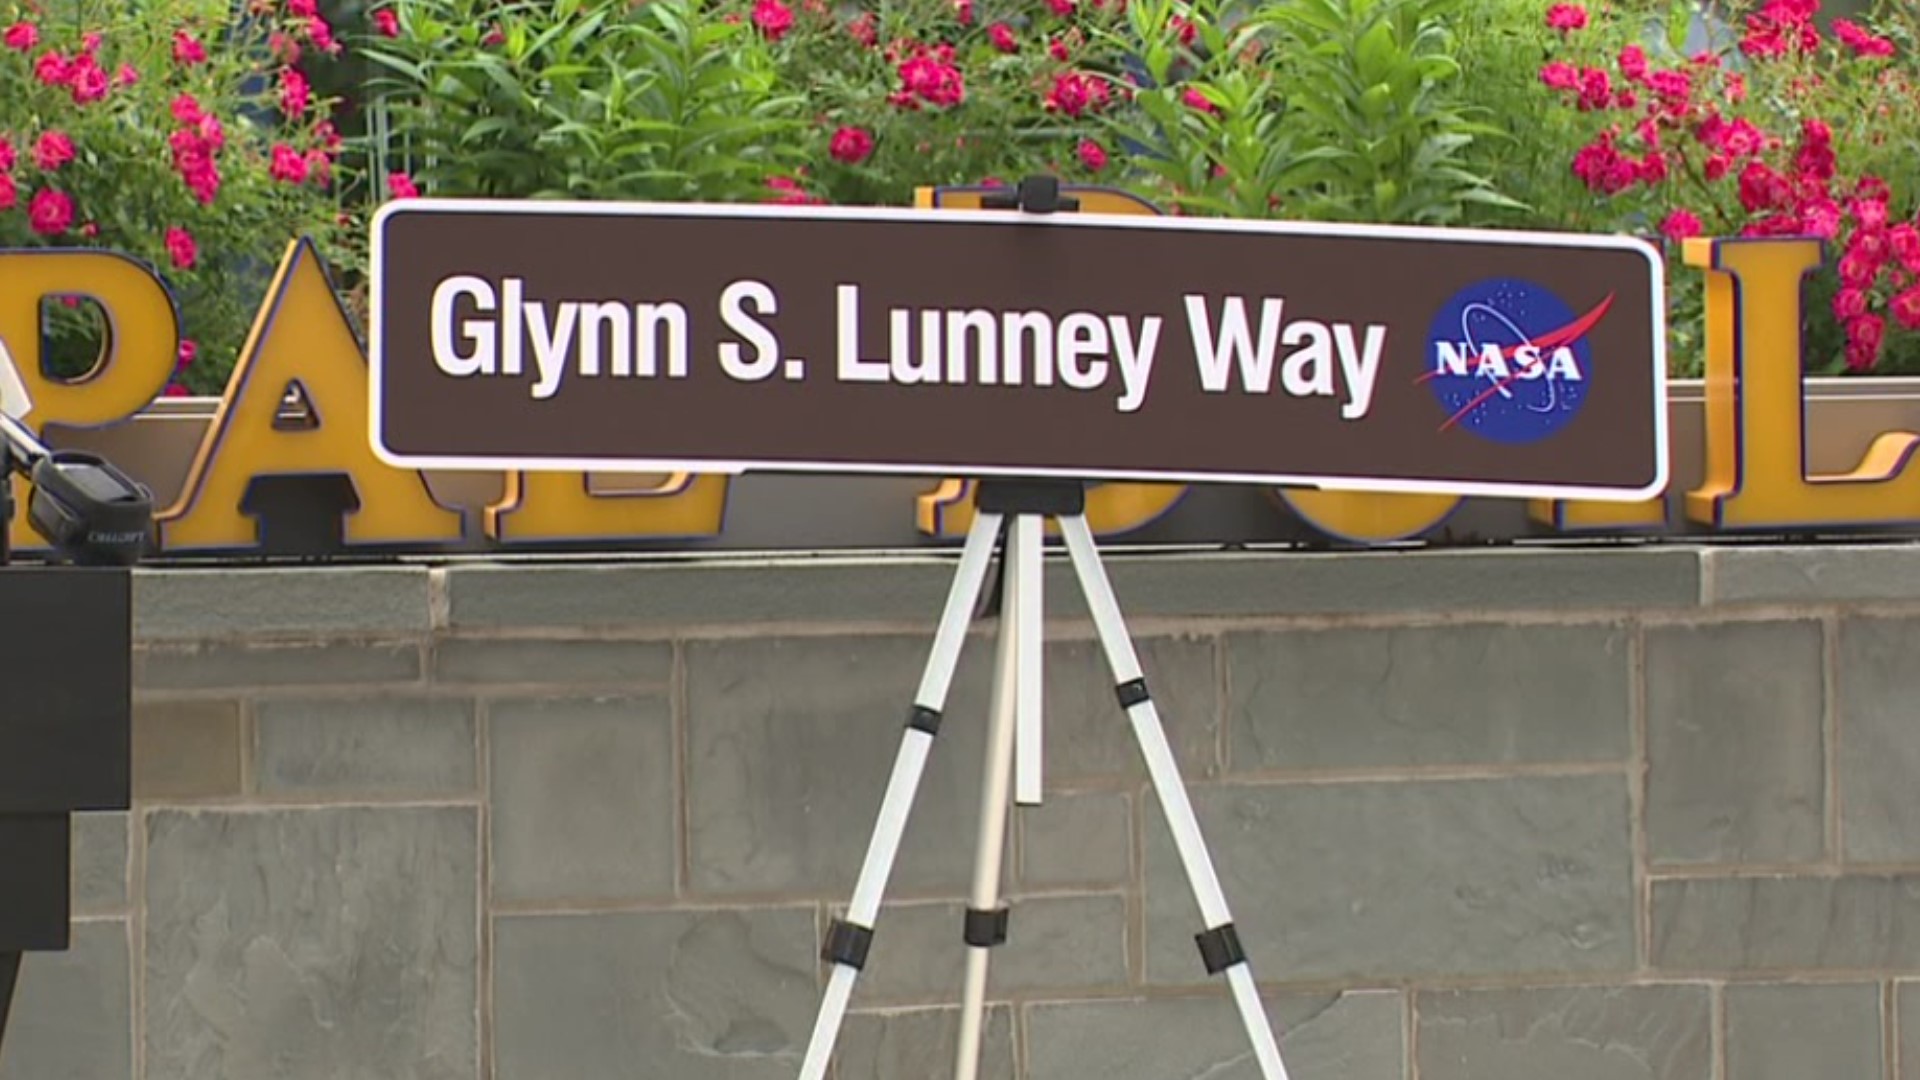 Glynn Lunney grew up in Old Forge and made history back in 1969 by helping to put the first man on the moon.